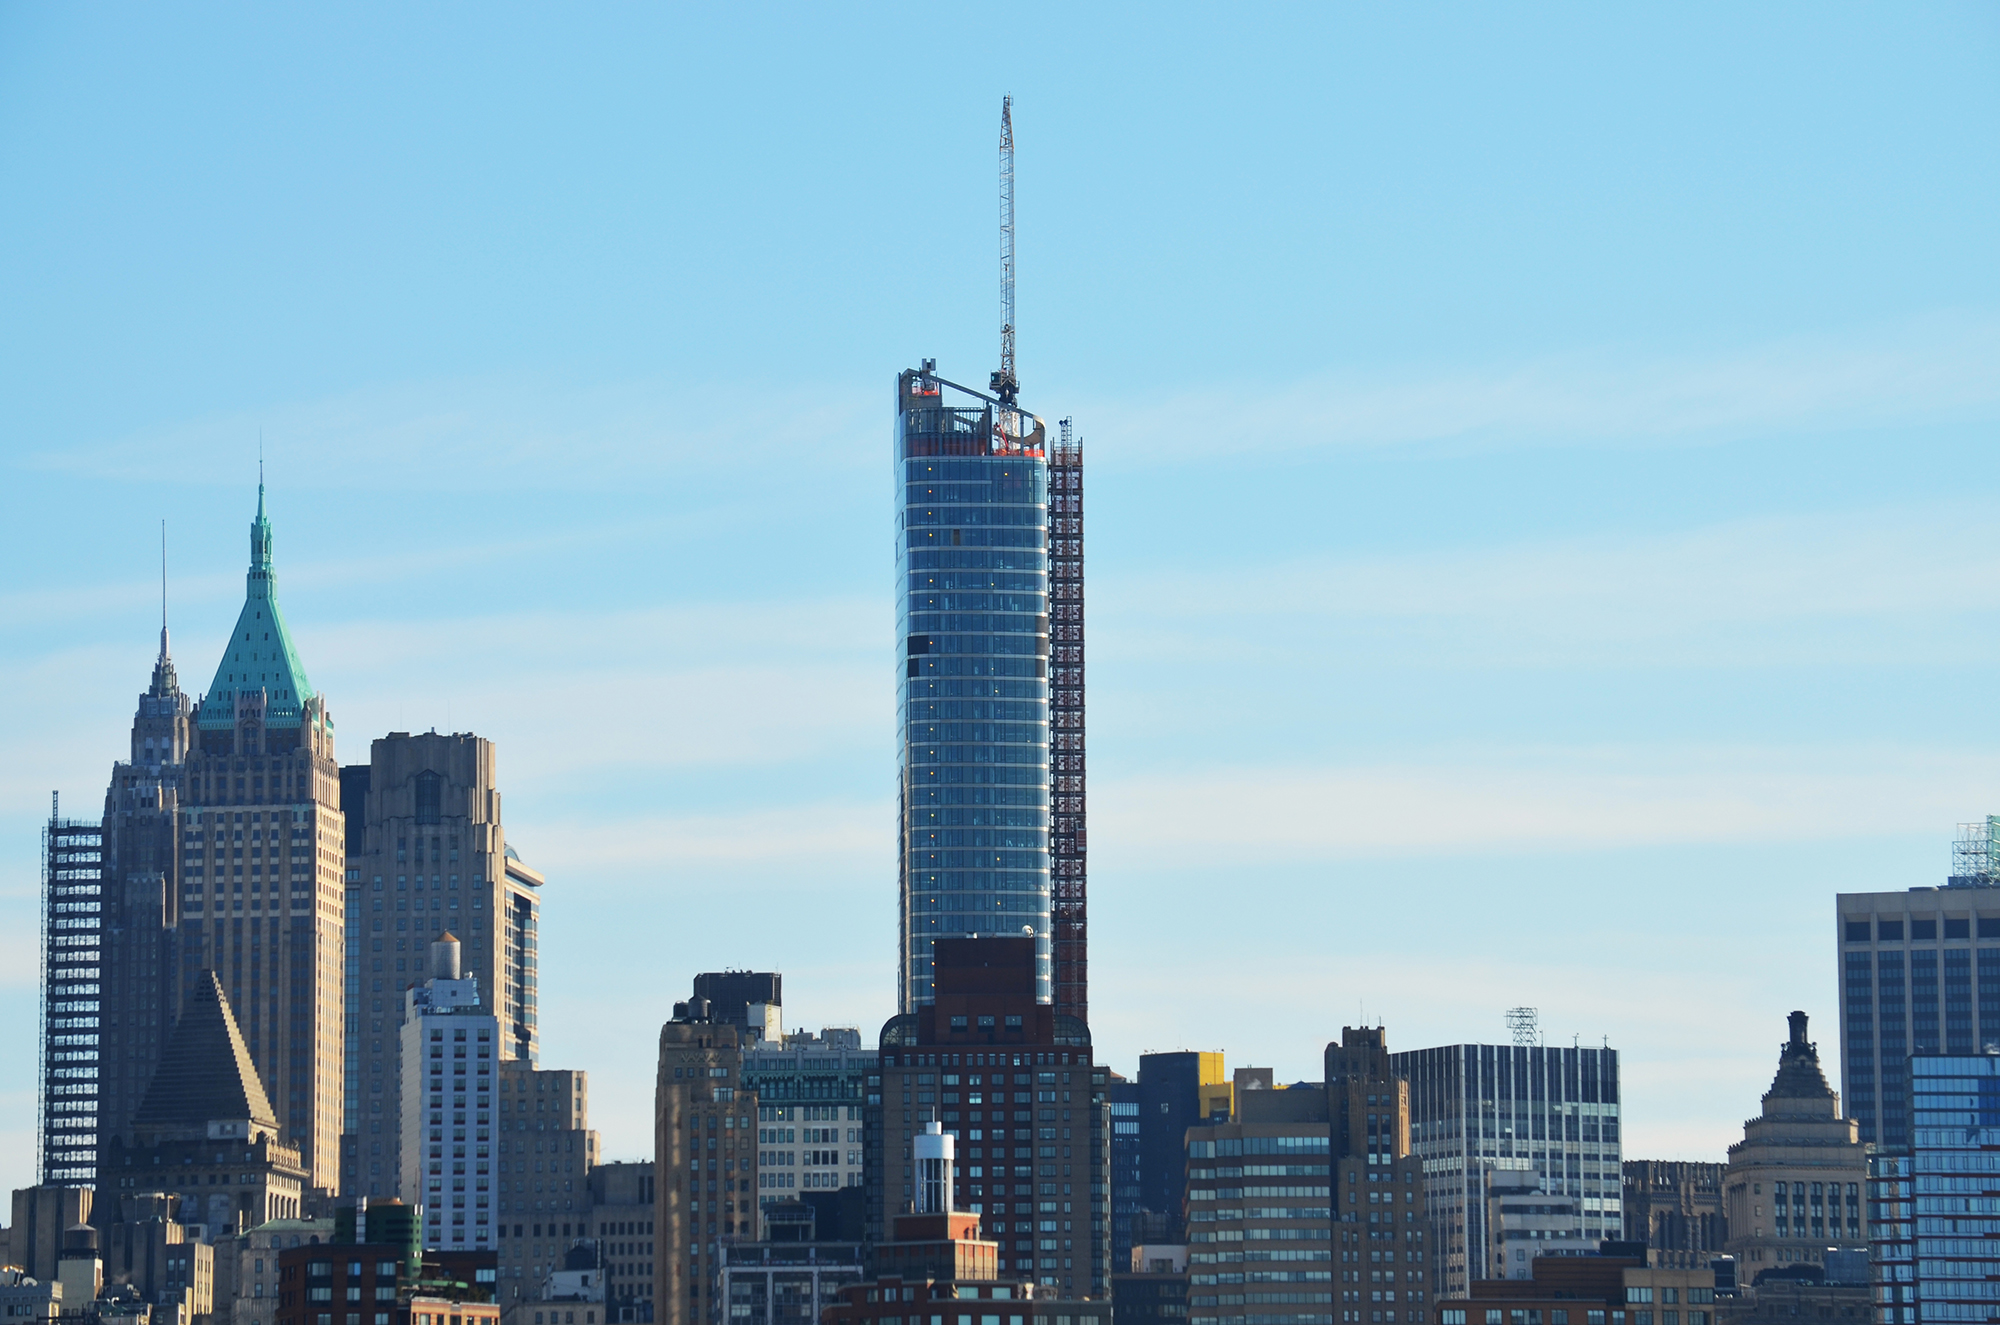 50 West Street as seen from Jersey City on January 28, 2016. Photo by Evan Bindelglass